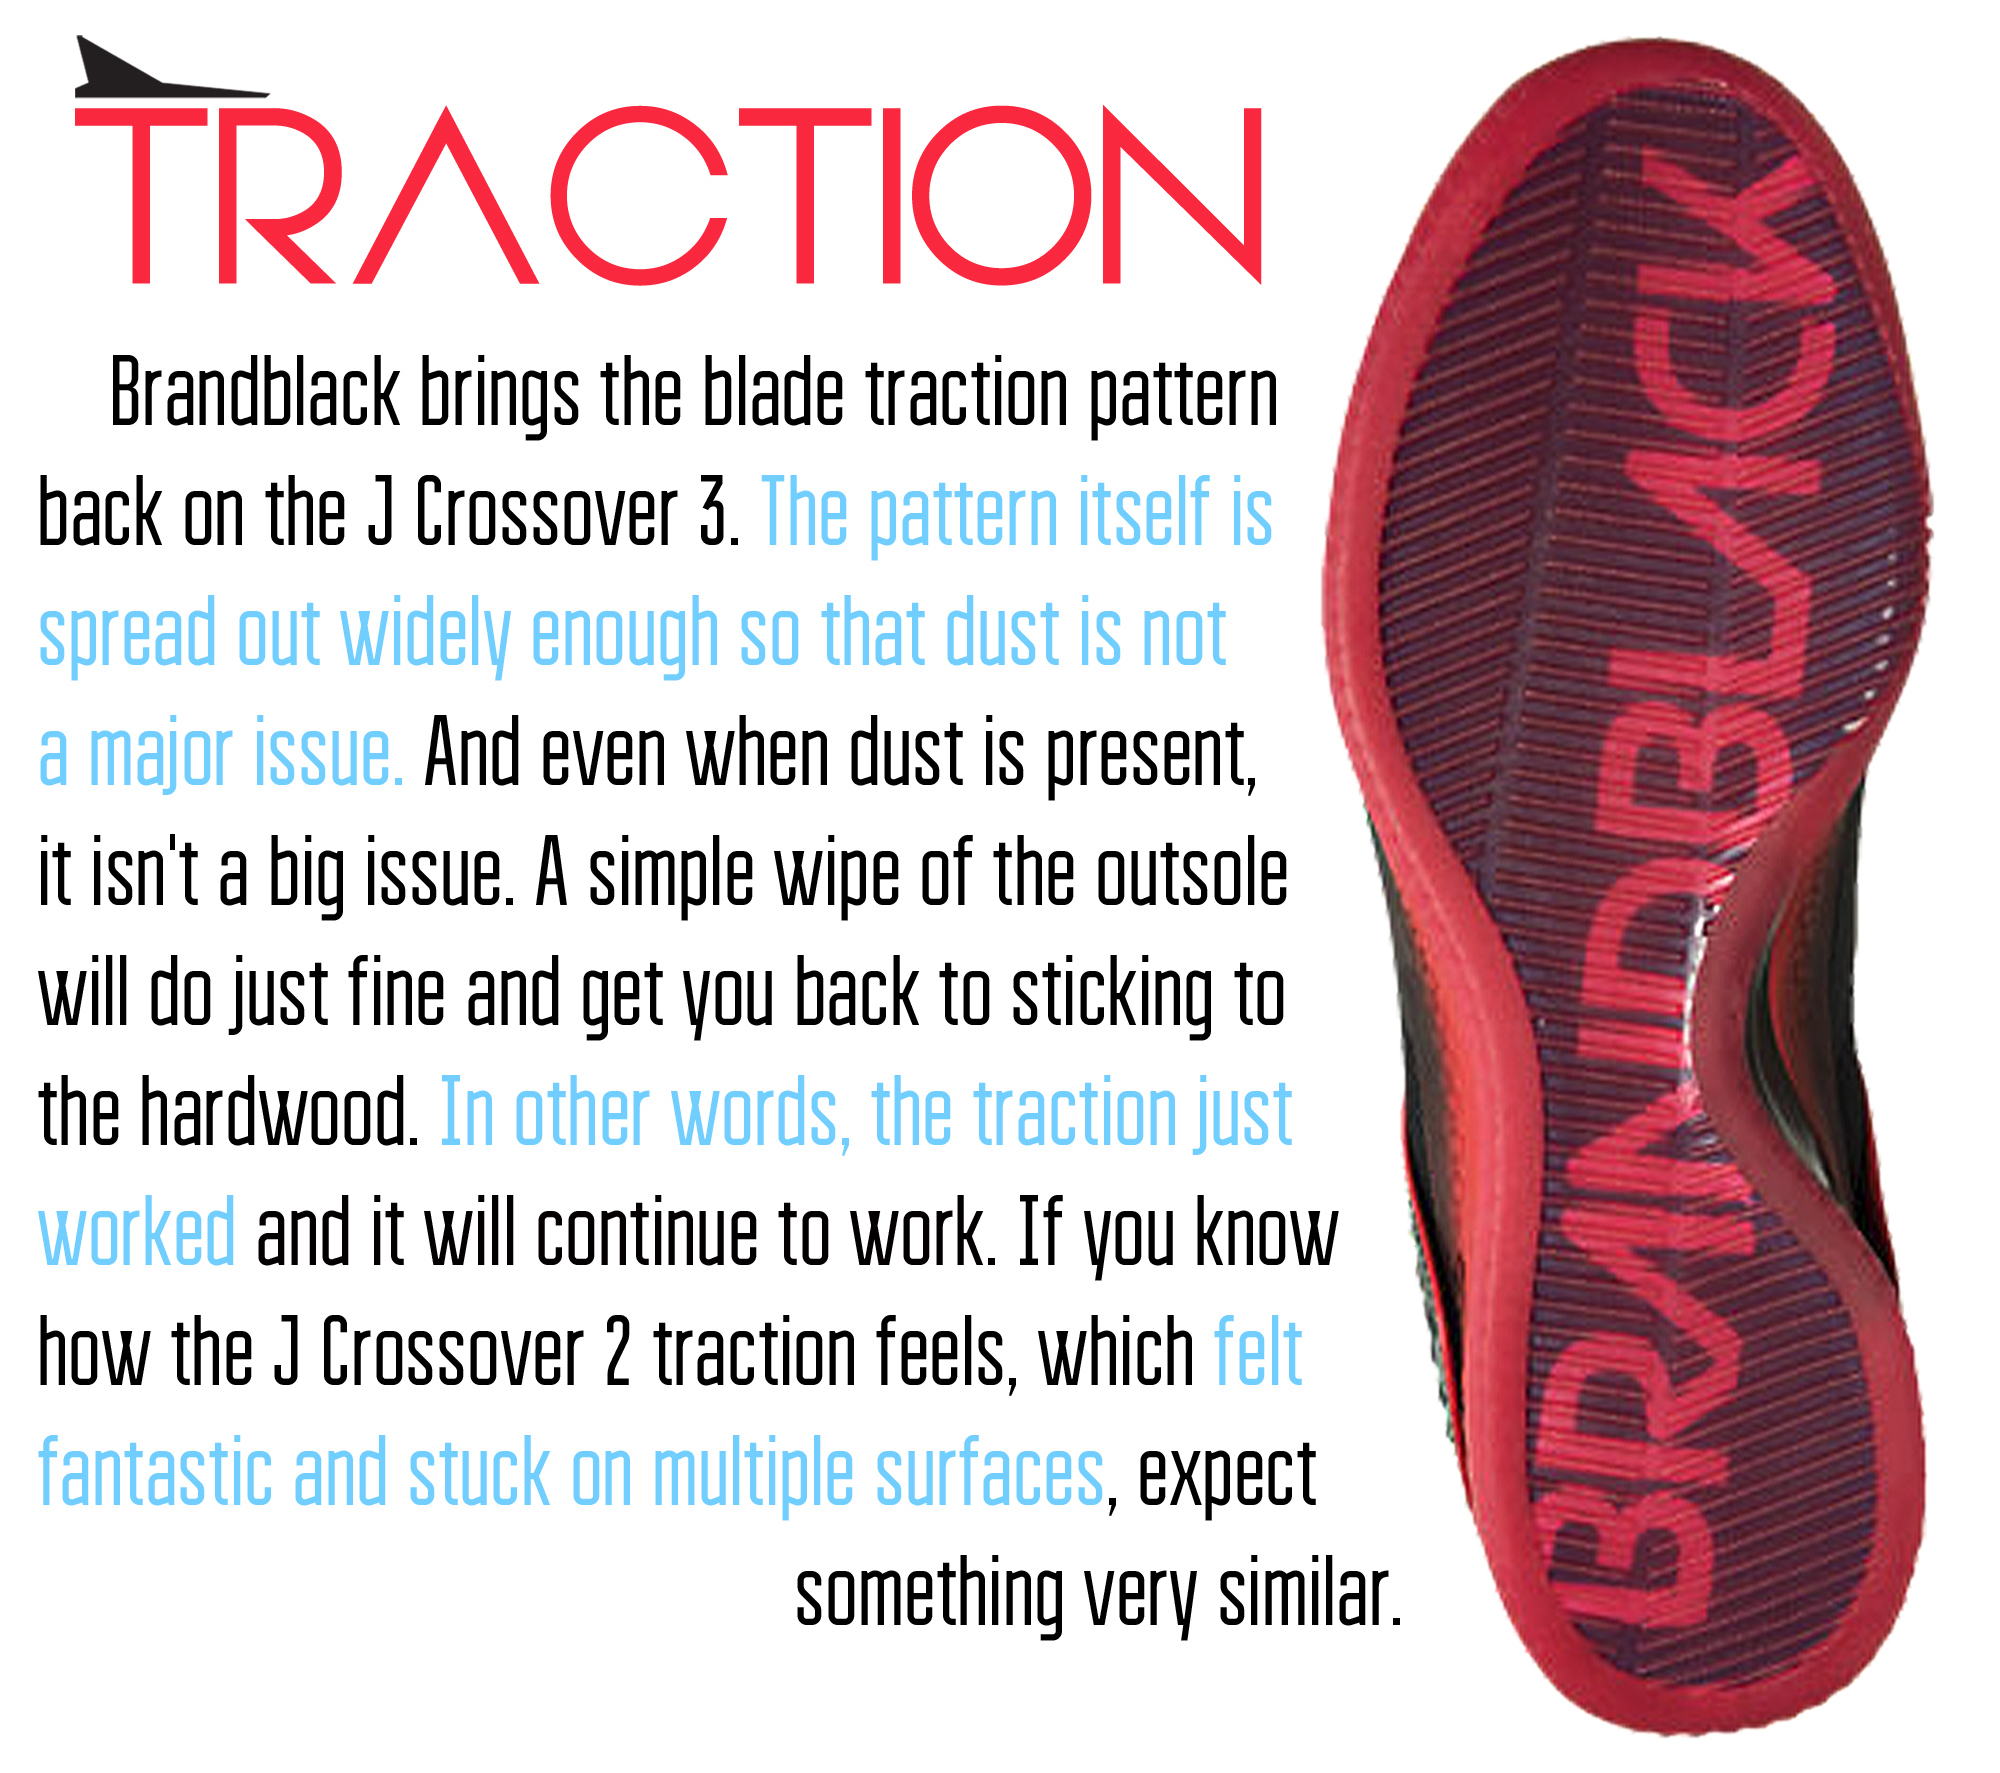 J Crossover 3 - Traction